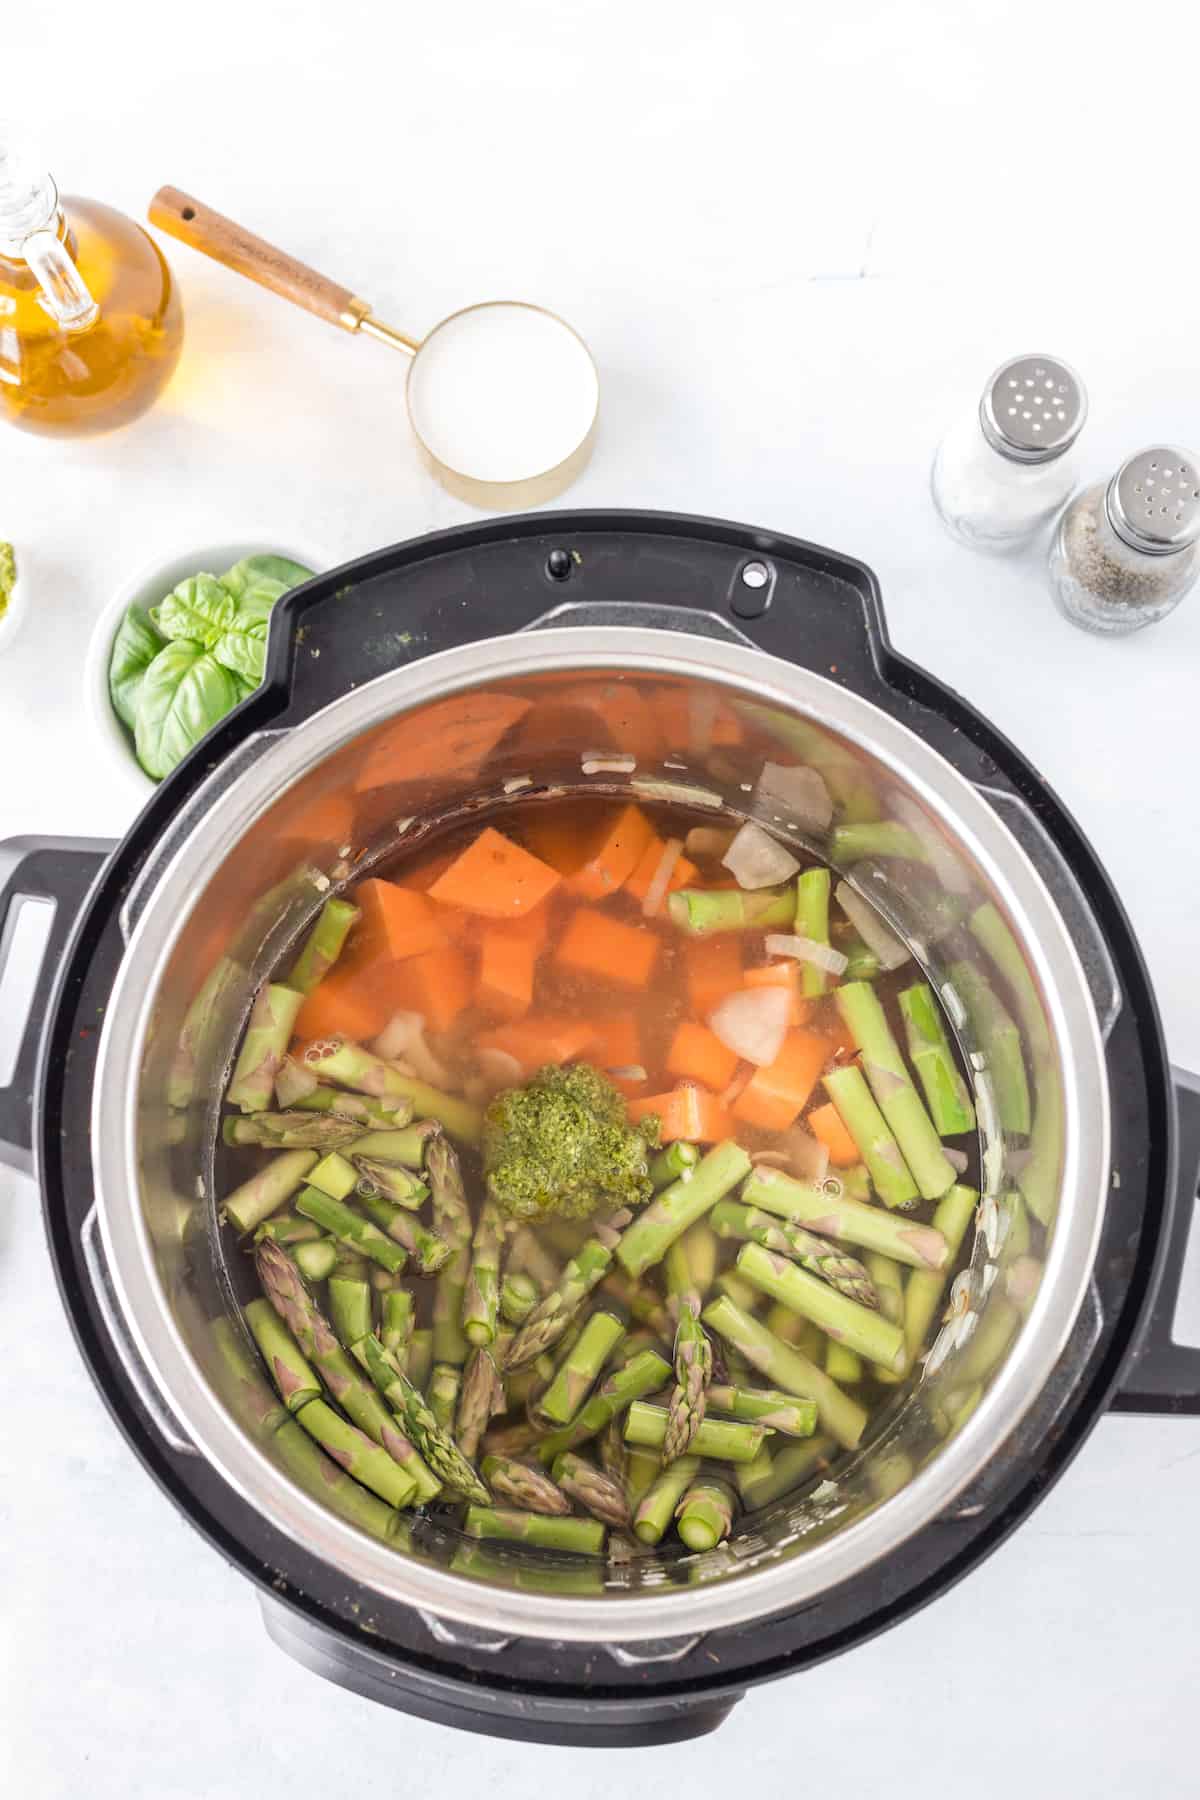 Sweet potatoes, chopped asparagus and spices in a pressure cooker.